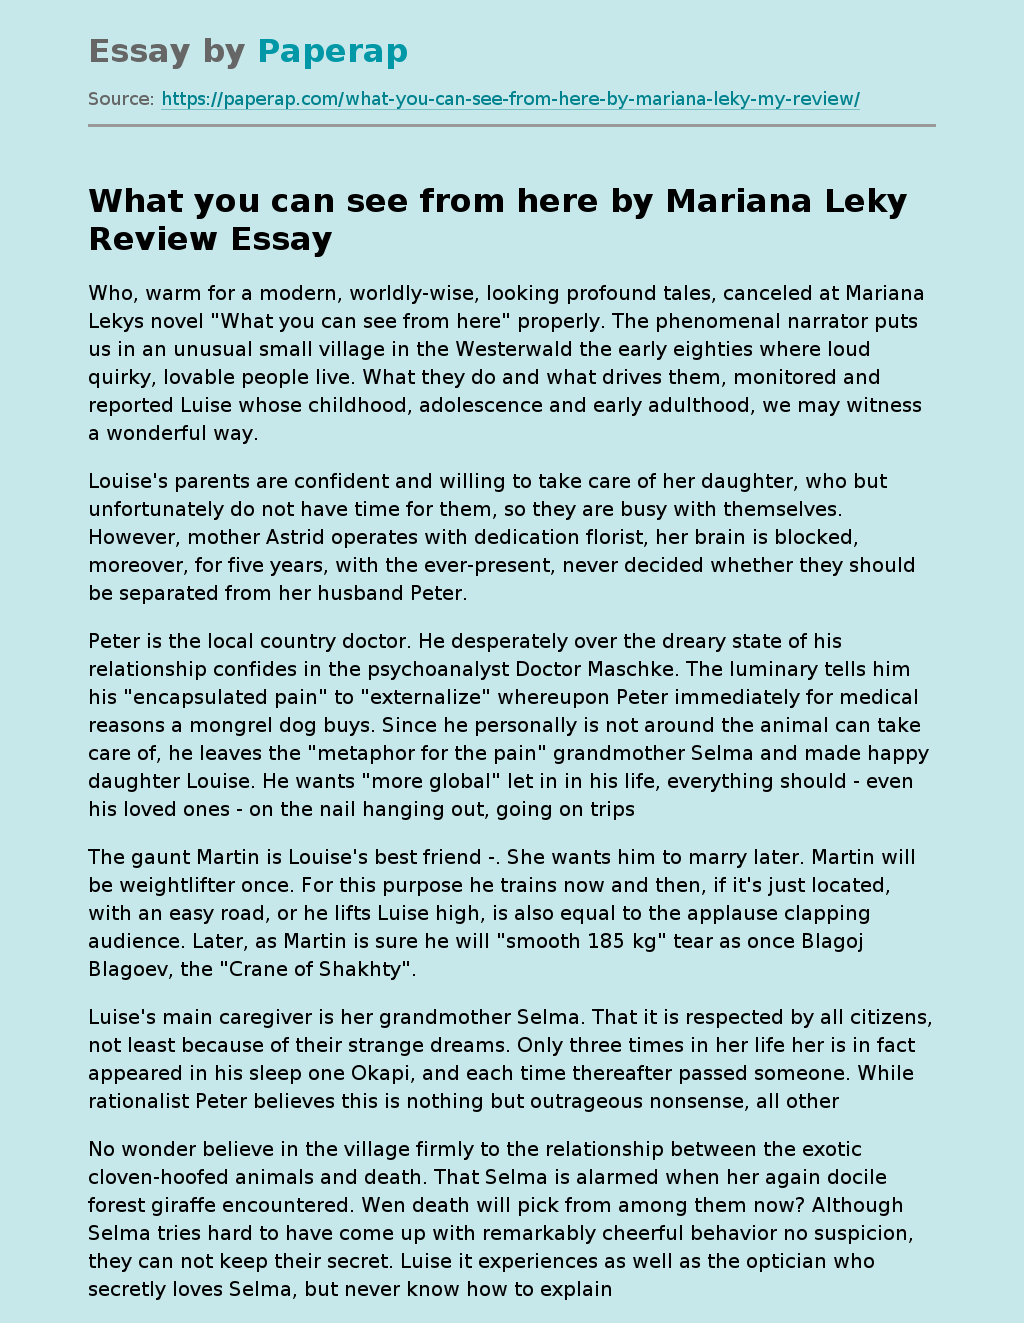 What you can see from here by Mariana Leky Review